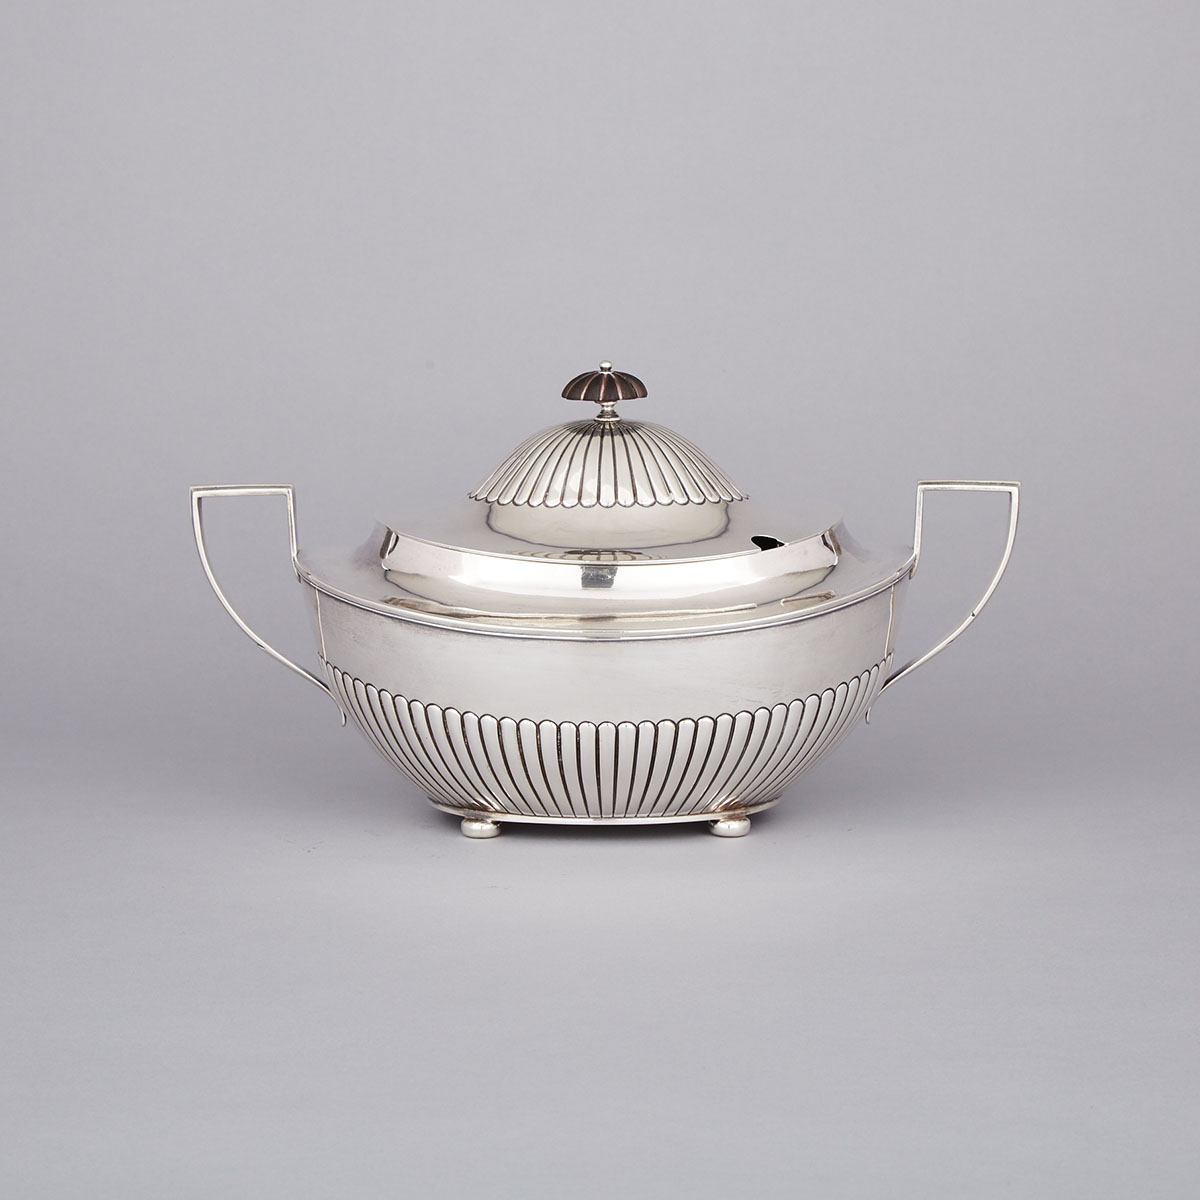 Canadian Silver Soup Tureen, Henry Birks & Sons, Montreal, Que., 1904-1924